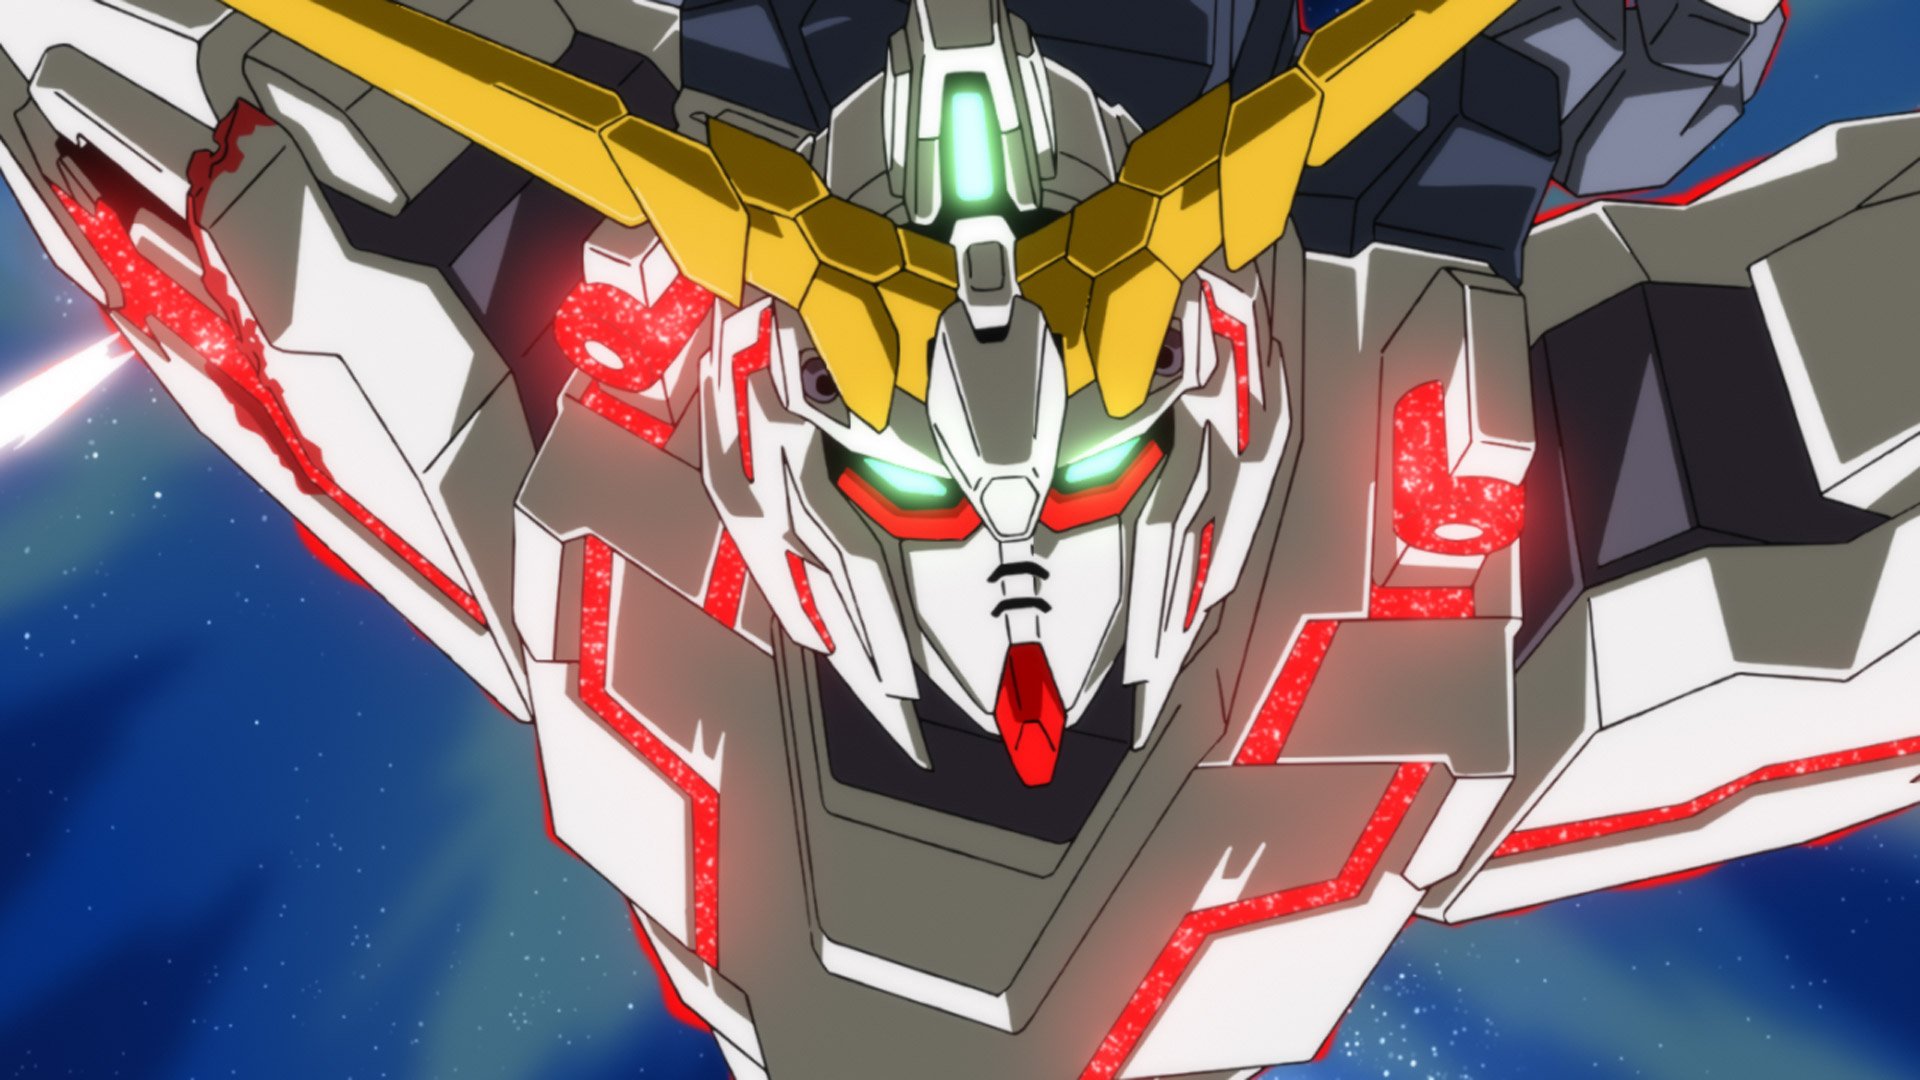 Now Player - Mobile Suit Gundam UC: The Ghost of Laplace